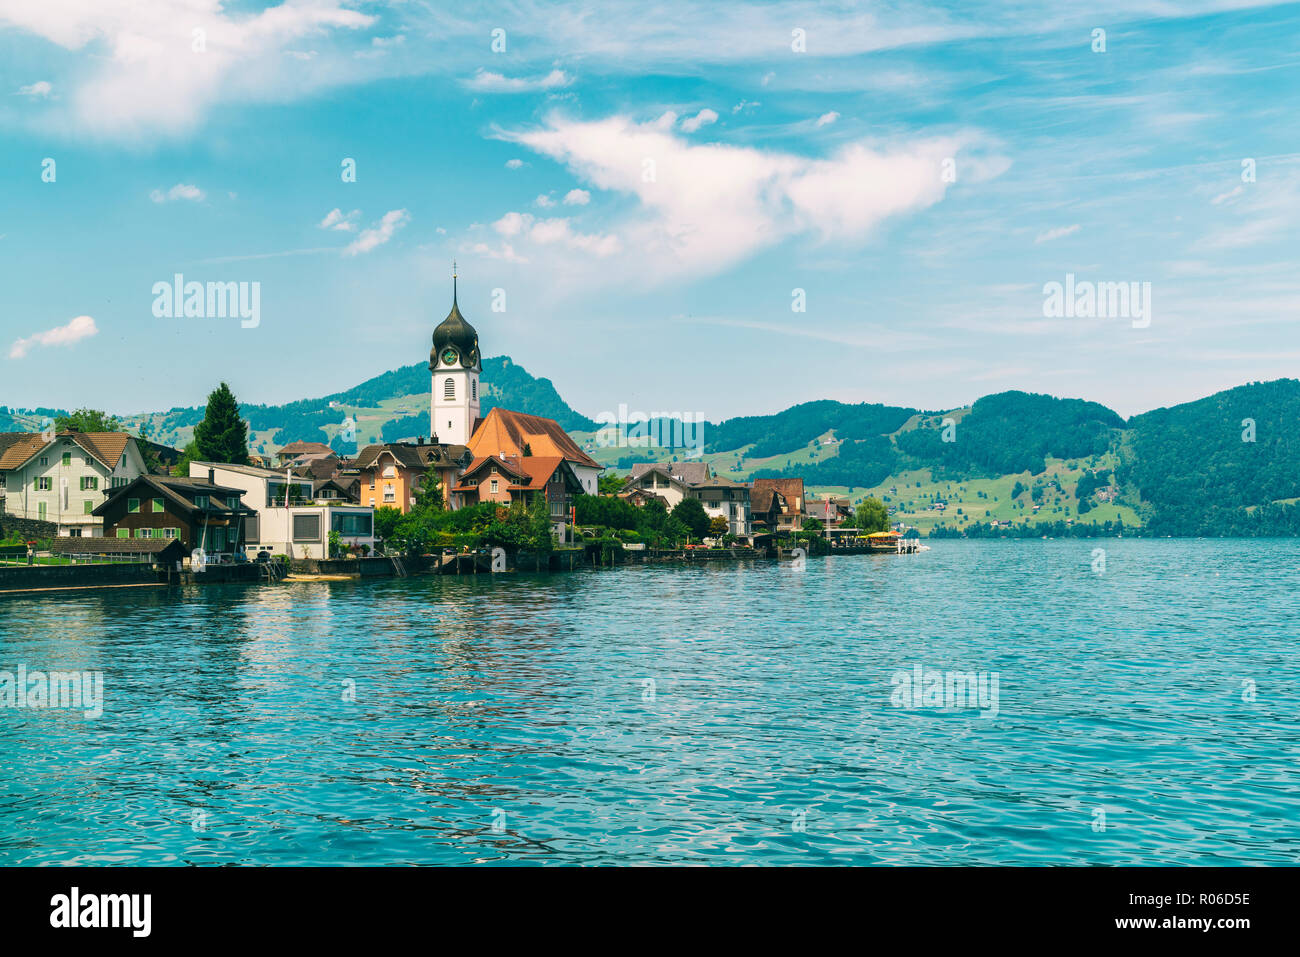 Beckenried village on Lucern Lake with the Catholic church of St. Heinrich seen in the middle, Beckenried, Nidwalden, Switzerland, Europe Stock Photo